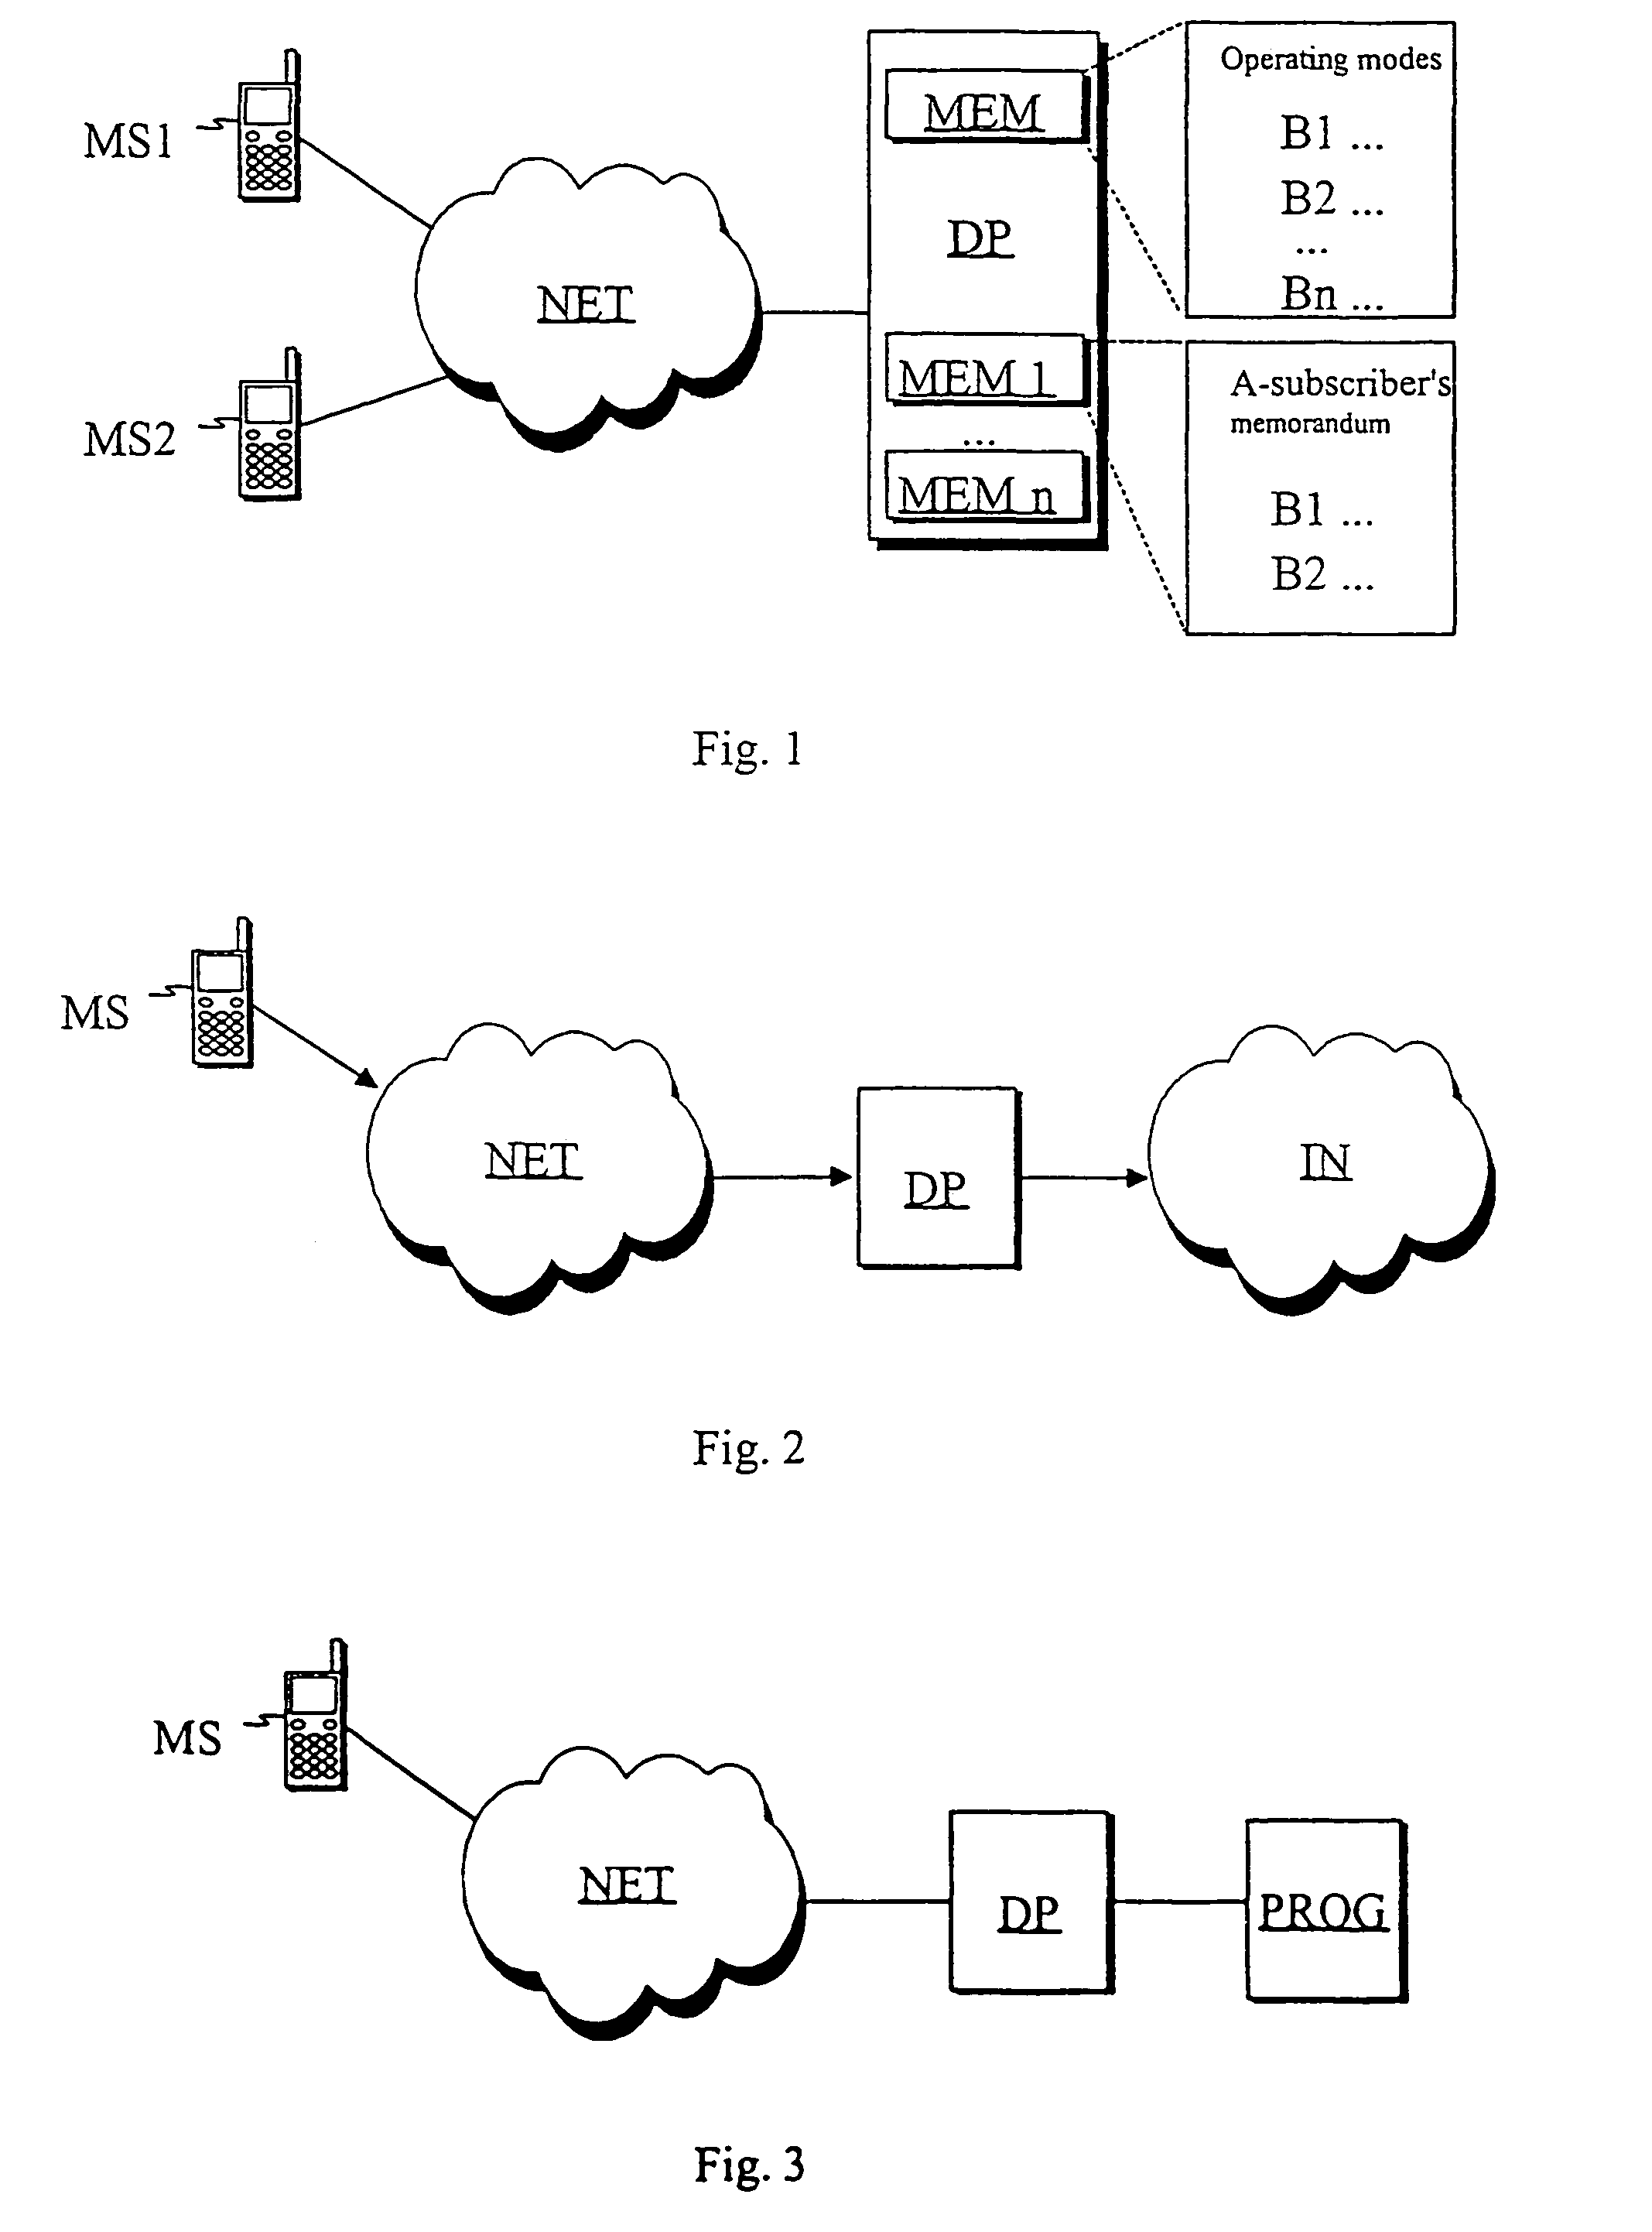 System and method for determining, storing and utilizing operating mode data of a user telecommunication terminal